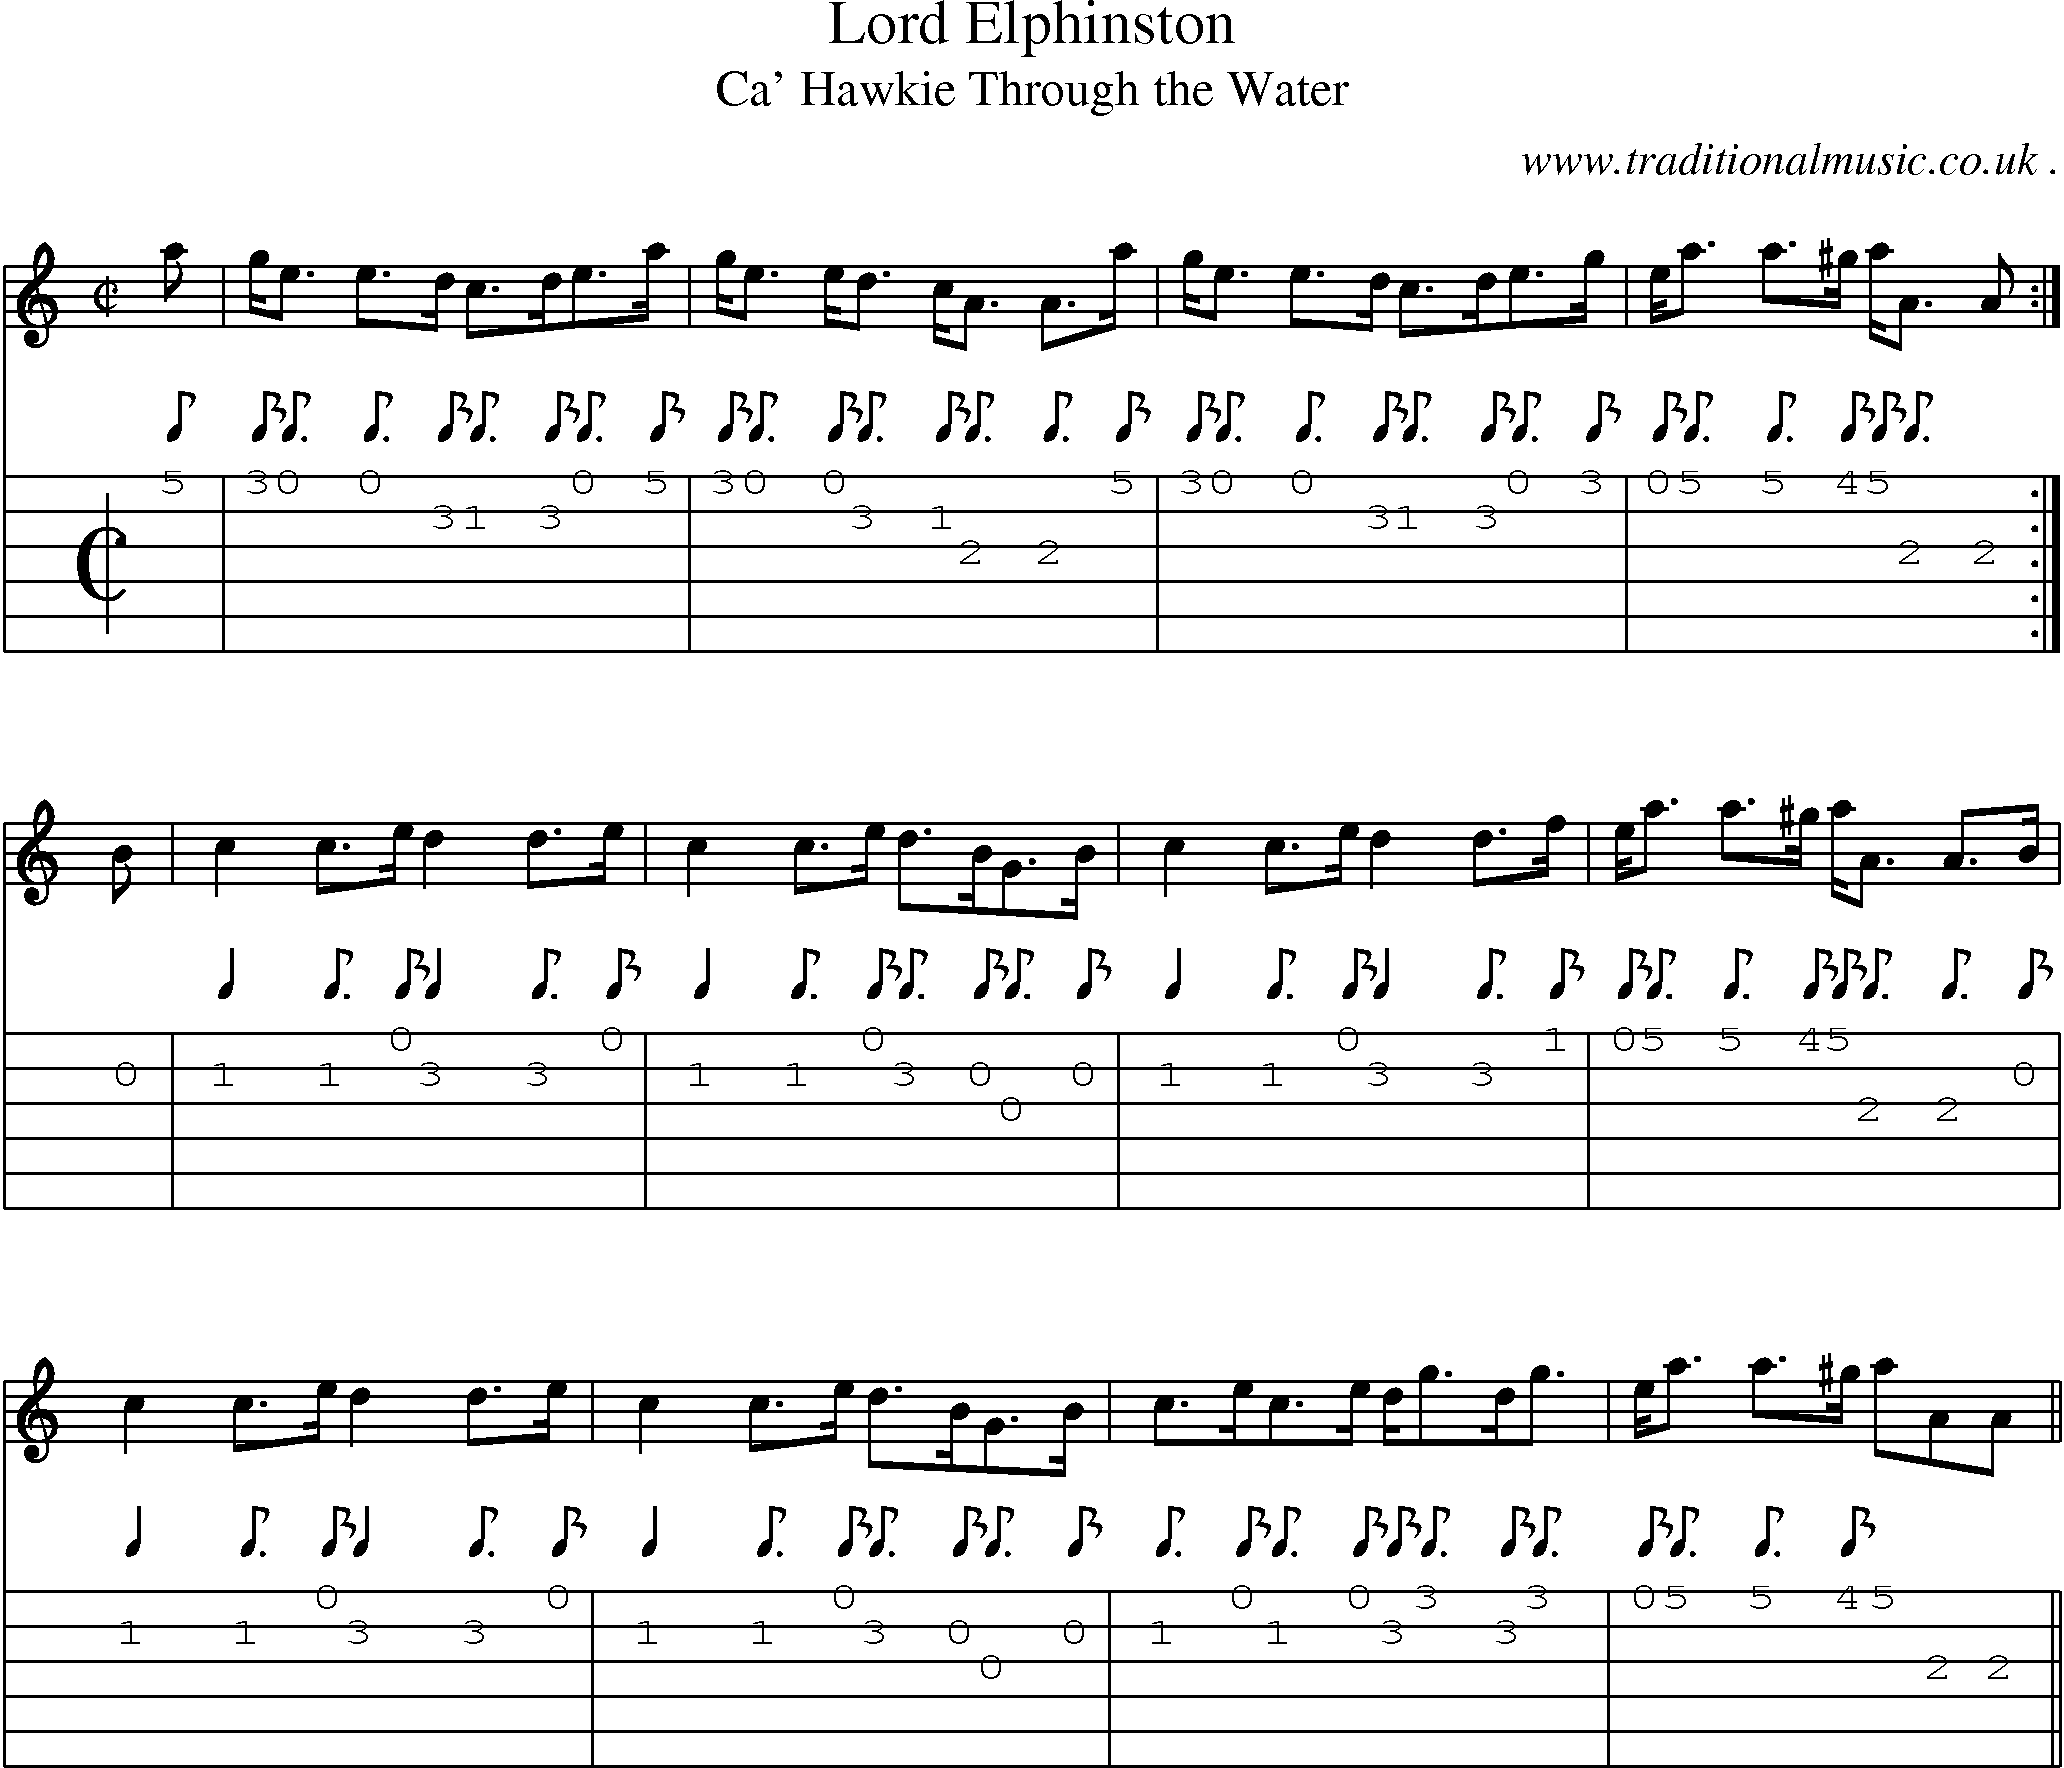 Sheet-music  score, Chords and Guitar Tabs for Lord Elphinston